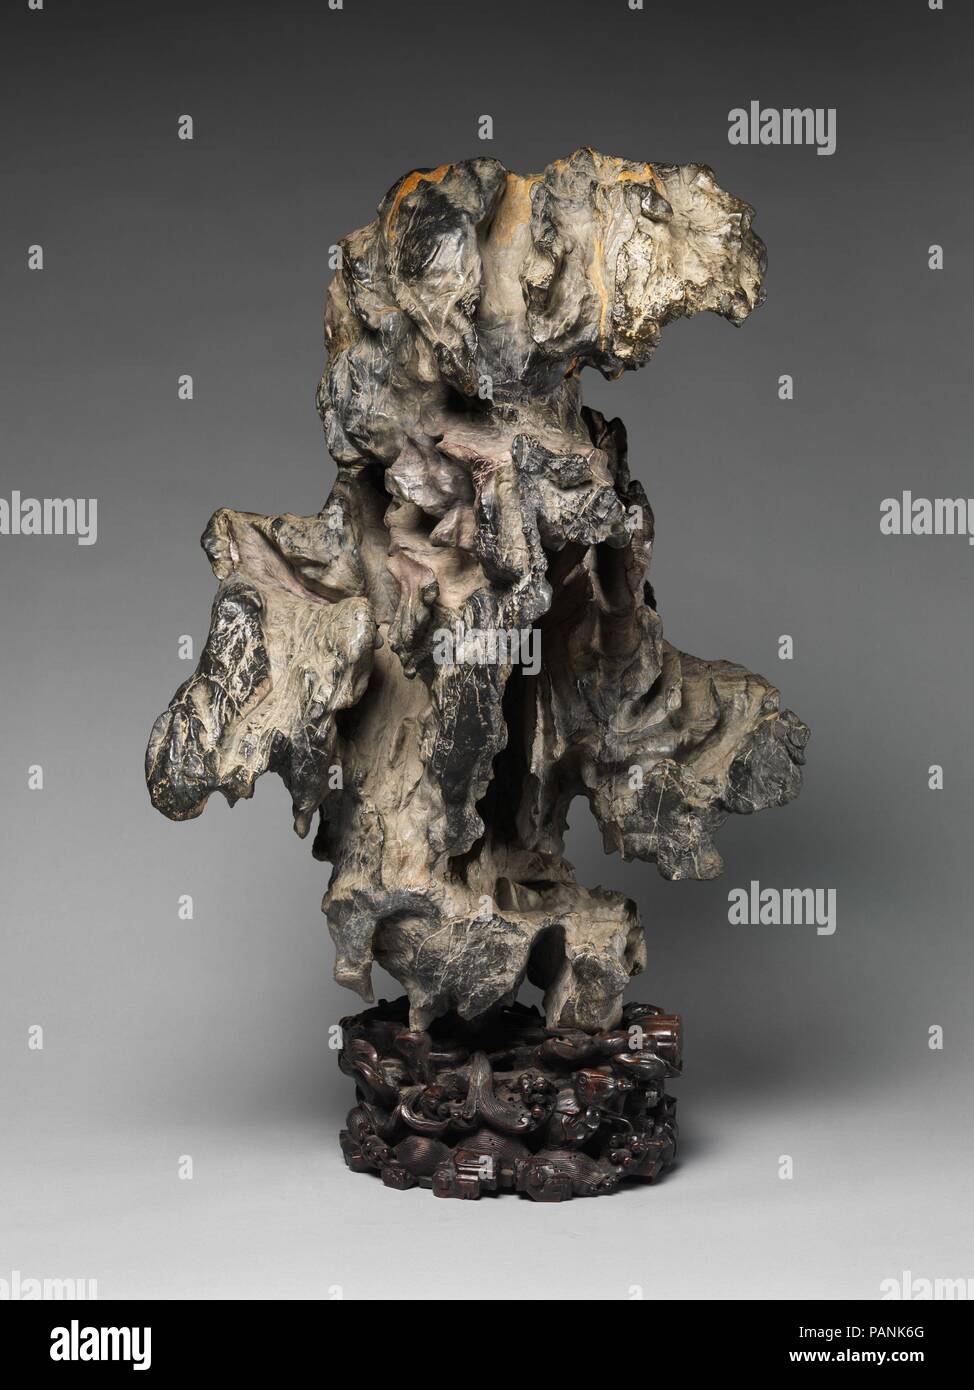 Rock in the Form of a Fantastic Mountain. Culture: China. Dimensions: H. (with stand) 32 in. (81.3 cm); W. 21 in. (53.3 cm); D. 15 in. (38.1 cm). Date: 18th century. Museum: Metropolitan Museum of Art, New York, USA. Stock Photo